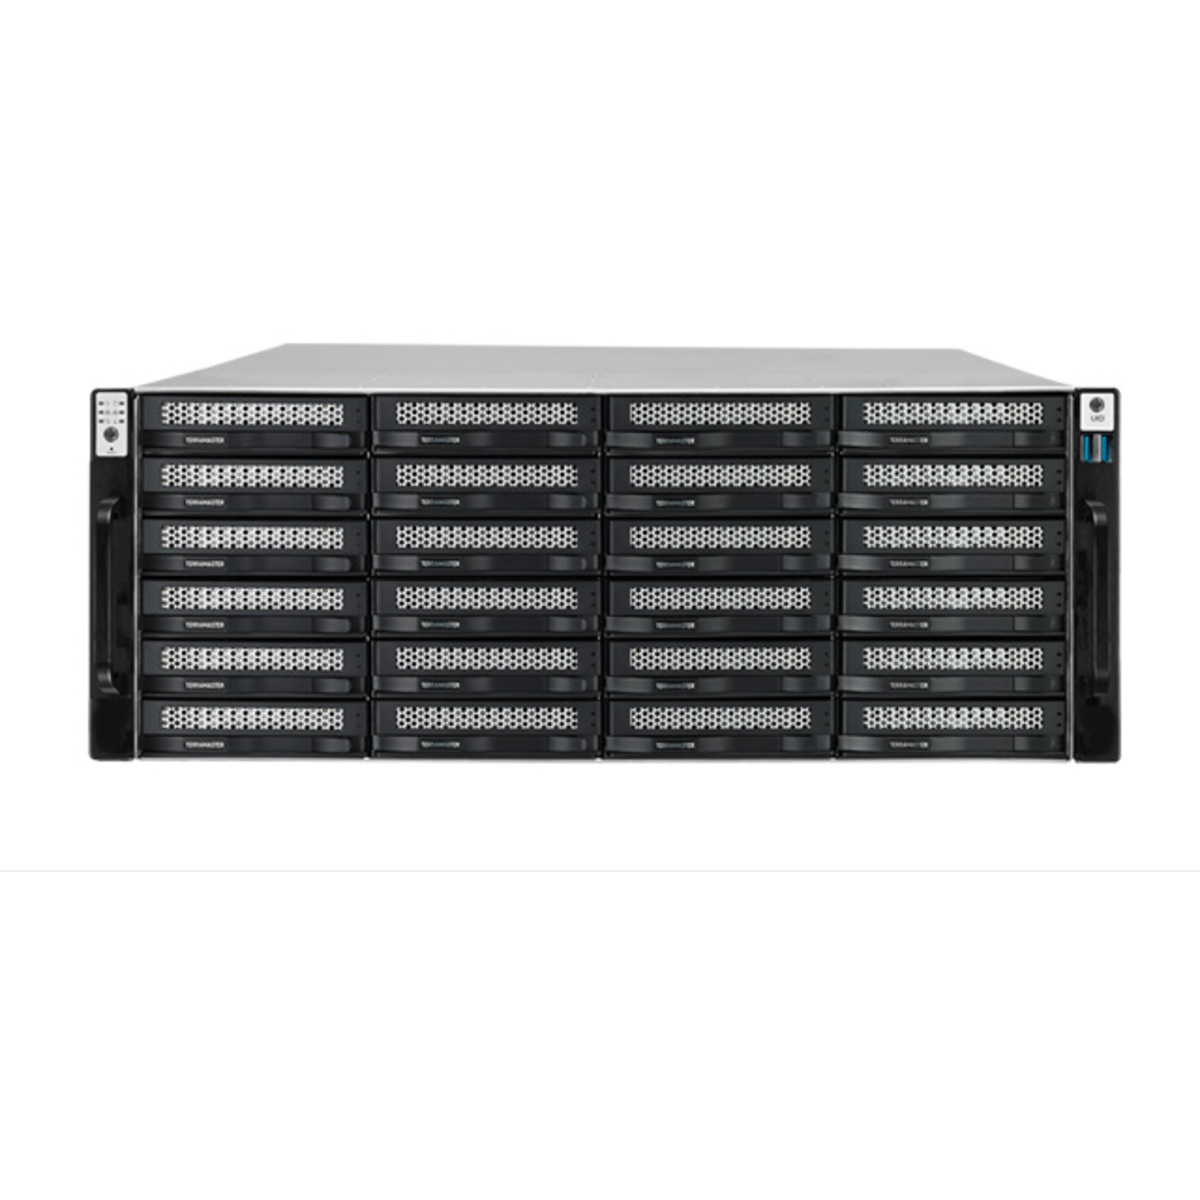 TerraMaster U24-722-2224 368tb 24-Bay RackMount Large Business / Enterprise NAS - Network Attached Storage Device 23x16tb Western Digital Red Pro WD161KFGX 3.5 7200rpm SATA 6Gb/s HDD NAS Class Drives Installed - Burn-In Tested U24-722-2224